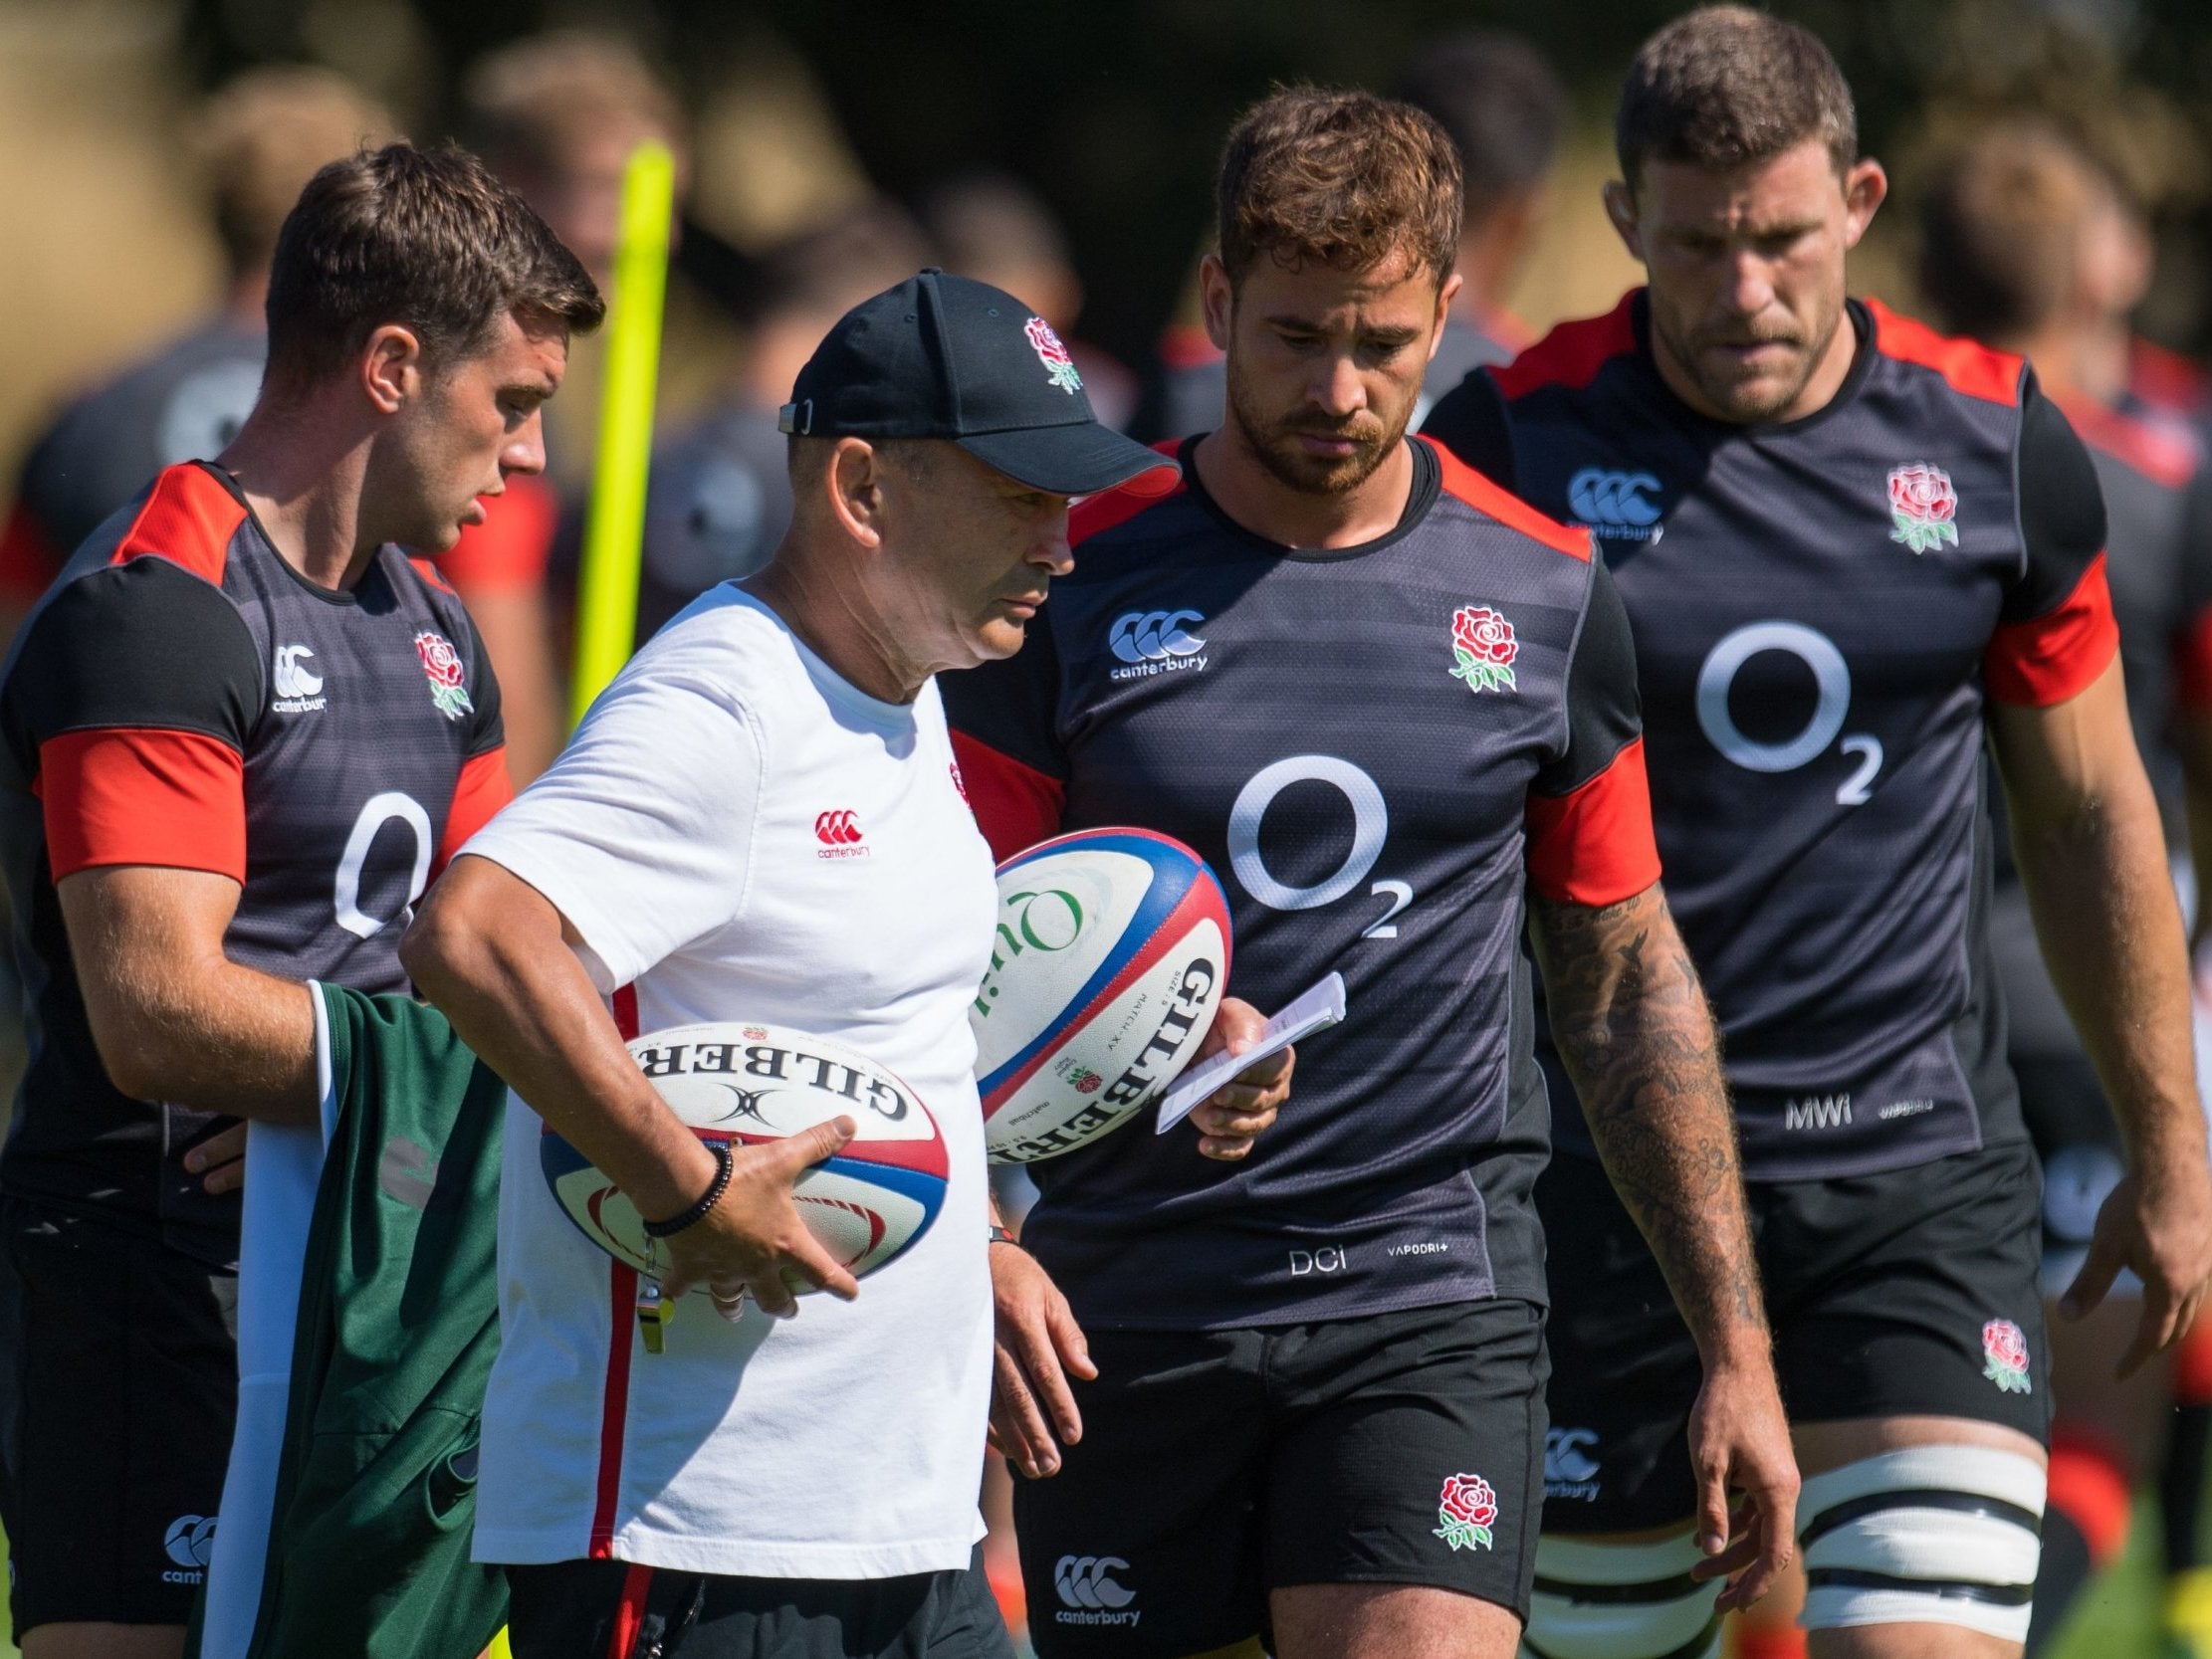 Danny Cipriani has not been shut out of the England squad, says head coach Eddie Jones